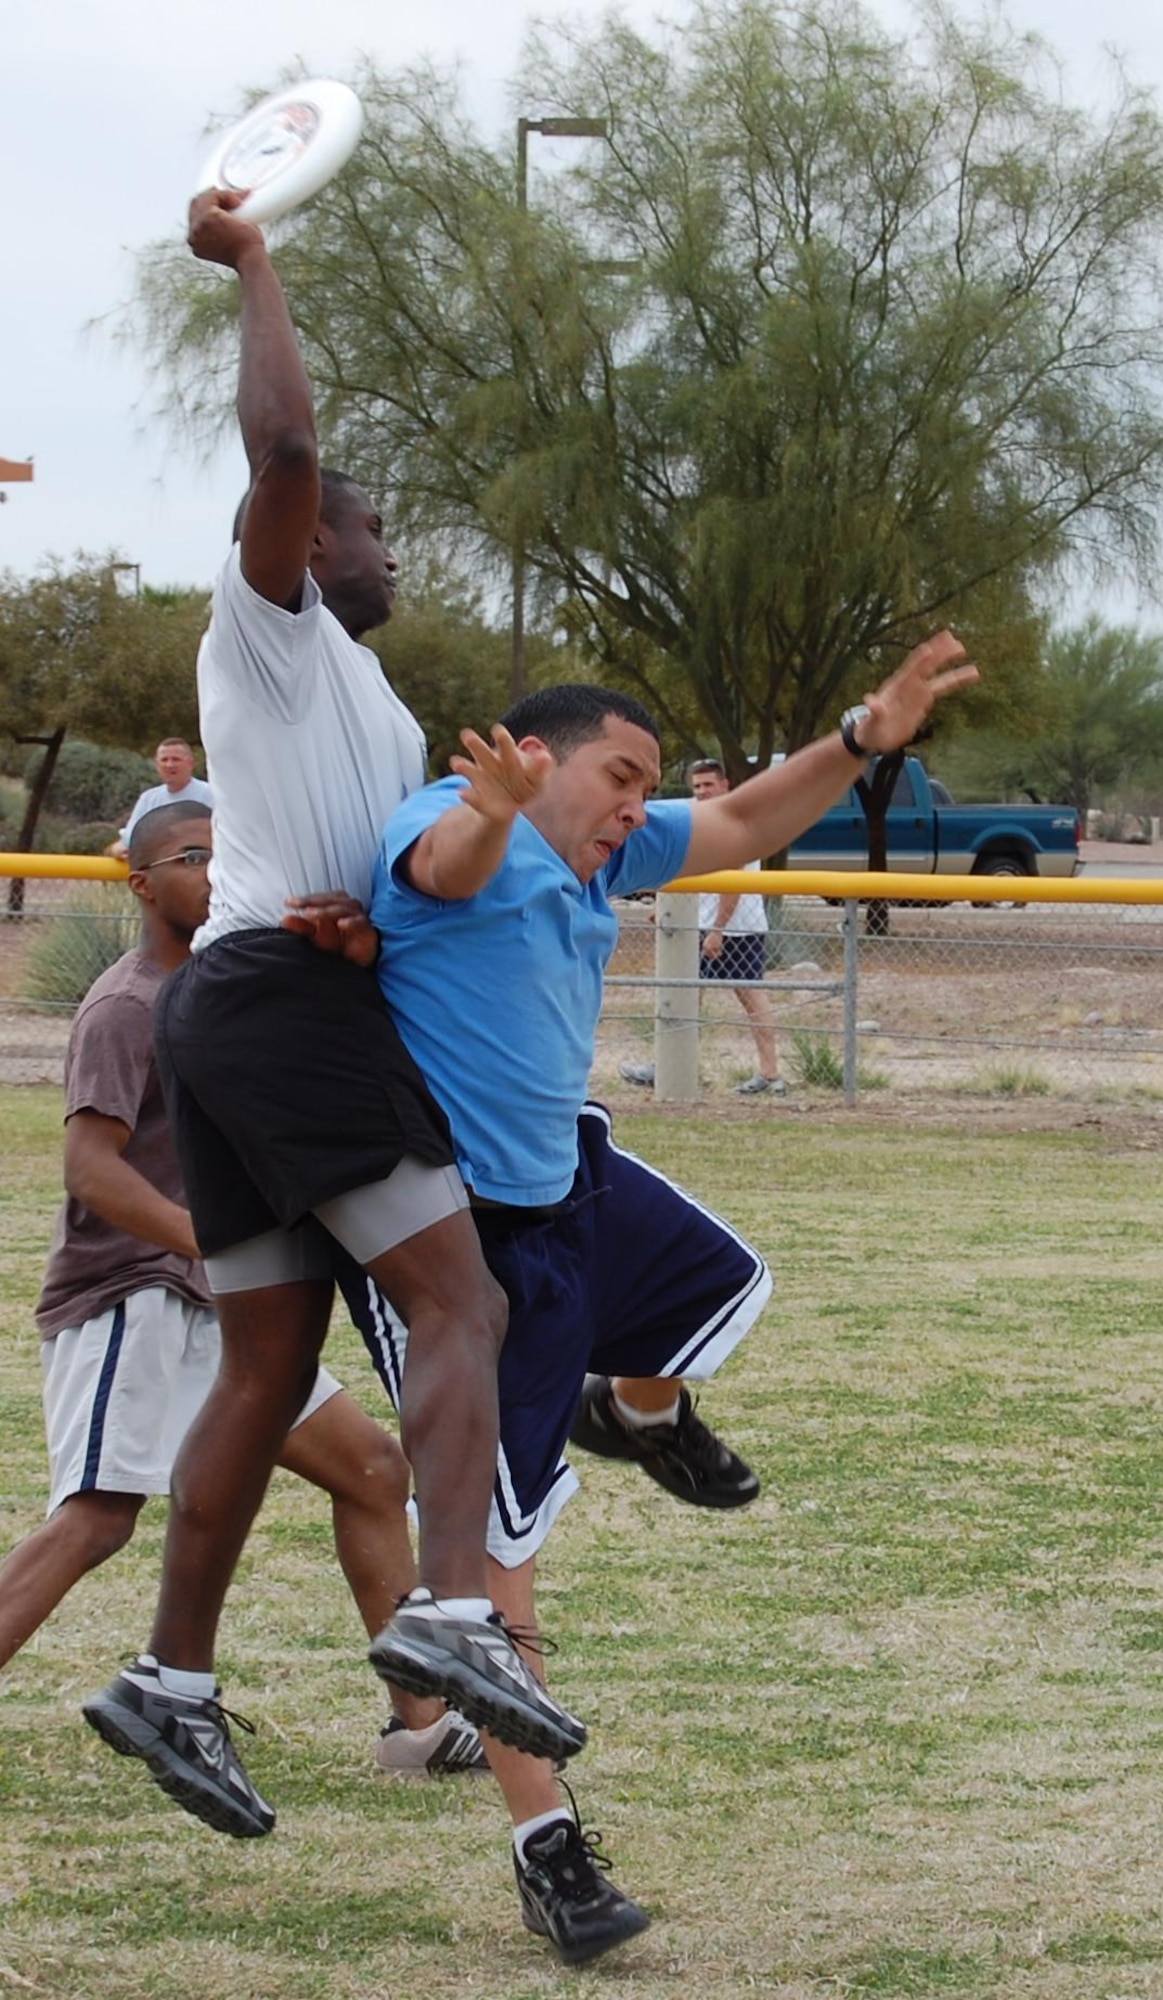 DAVIS-MONTHAN AIR FORCE BASE, Ariz. --  Senior Airman Raphael Mirabal-Lugo, 612th Air and Space Operations Center imagery analyst tries to block Sergeant First Class Kenneth Blackmon, 1st Battlefield Coordination Detachment, during the ultimate Frisbee portion of 12th Air Force (Air Forces Southern) sports day March 20. More than 200 members of 12th AF competed in the event. (U.S. Air Force photo by 1st Lt. Jason Coley) 
